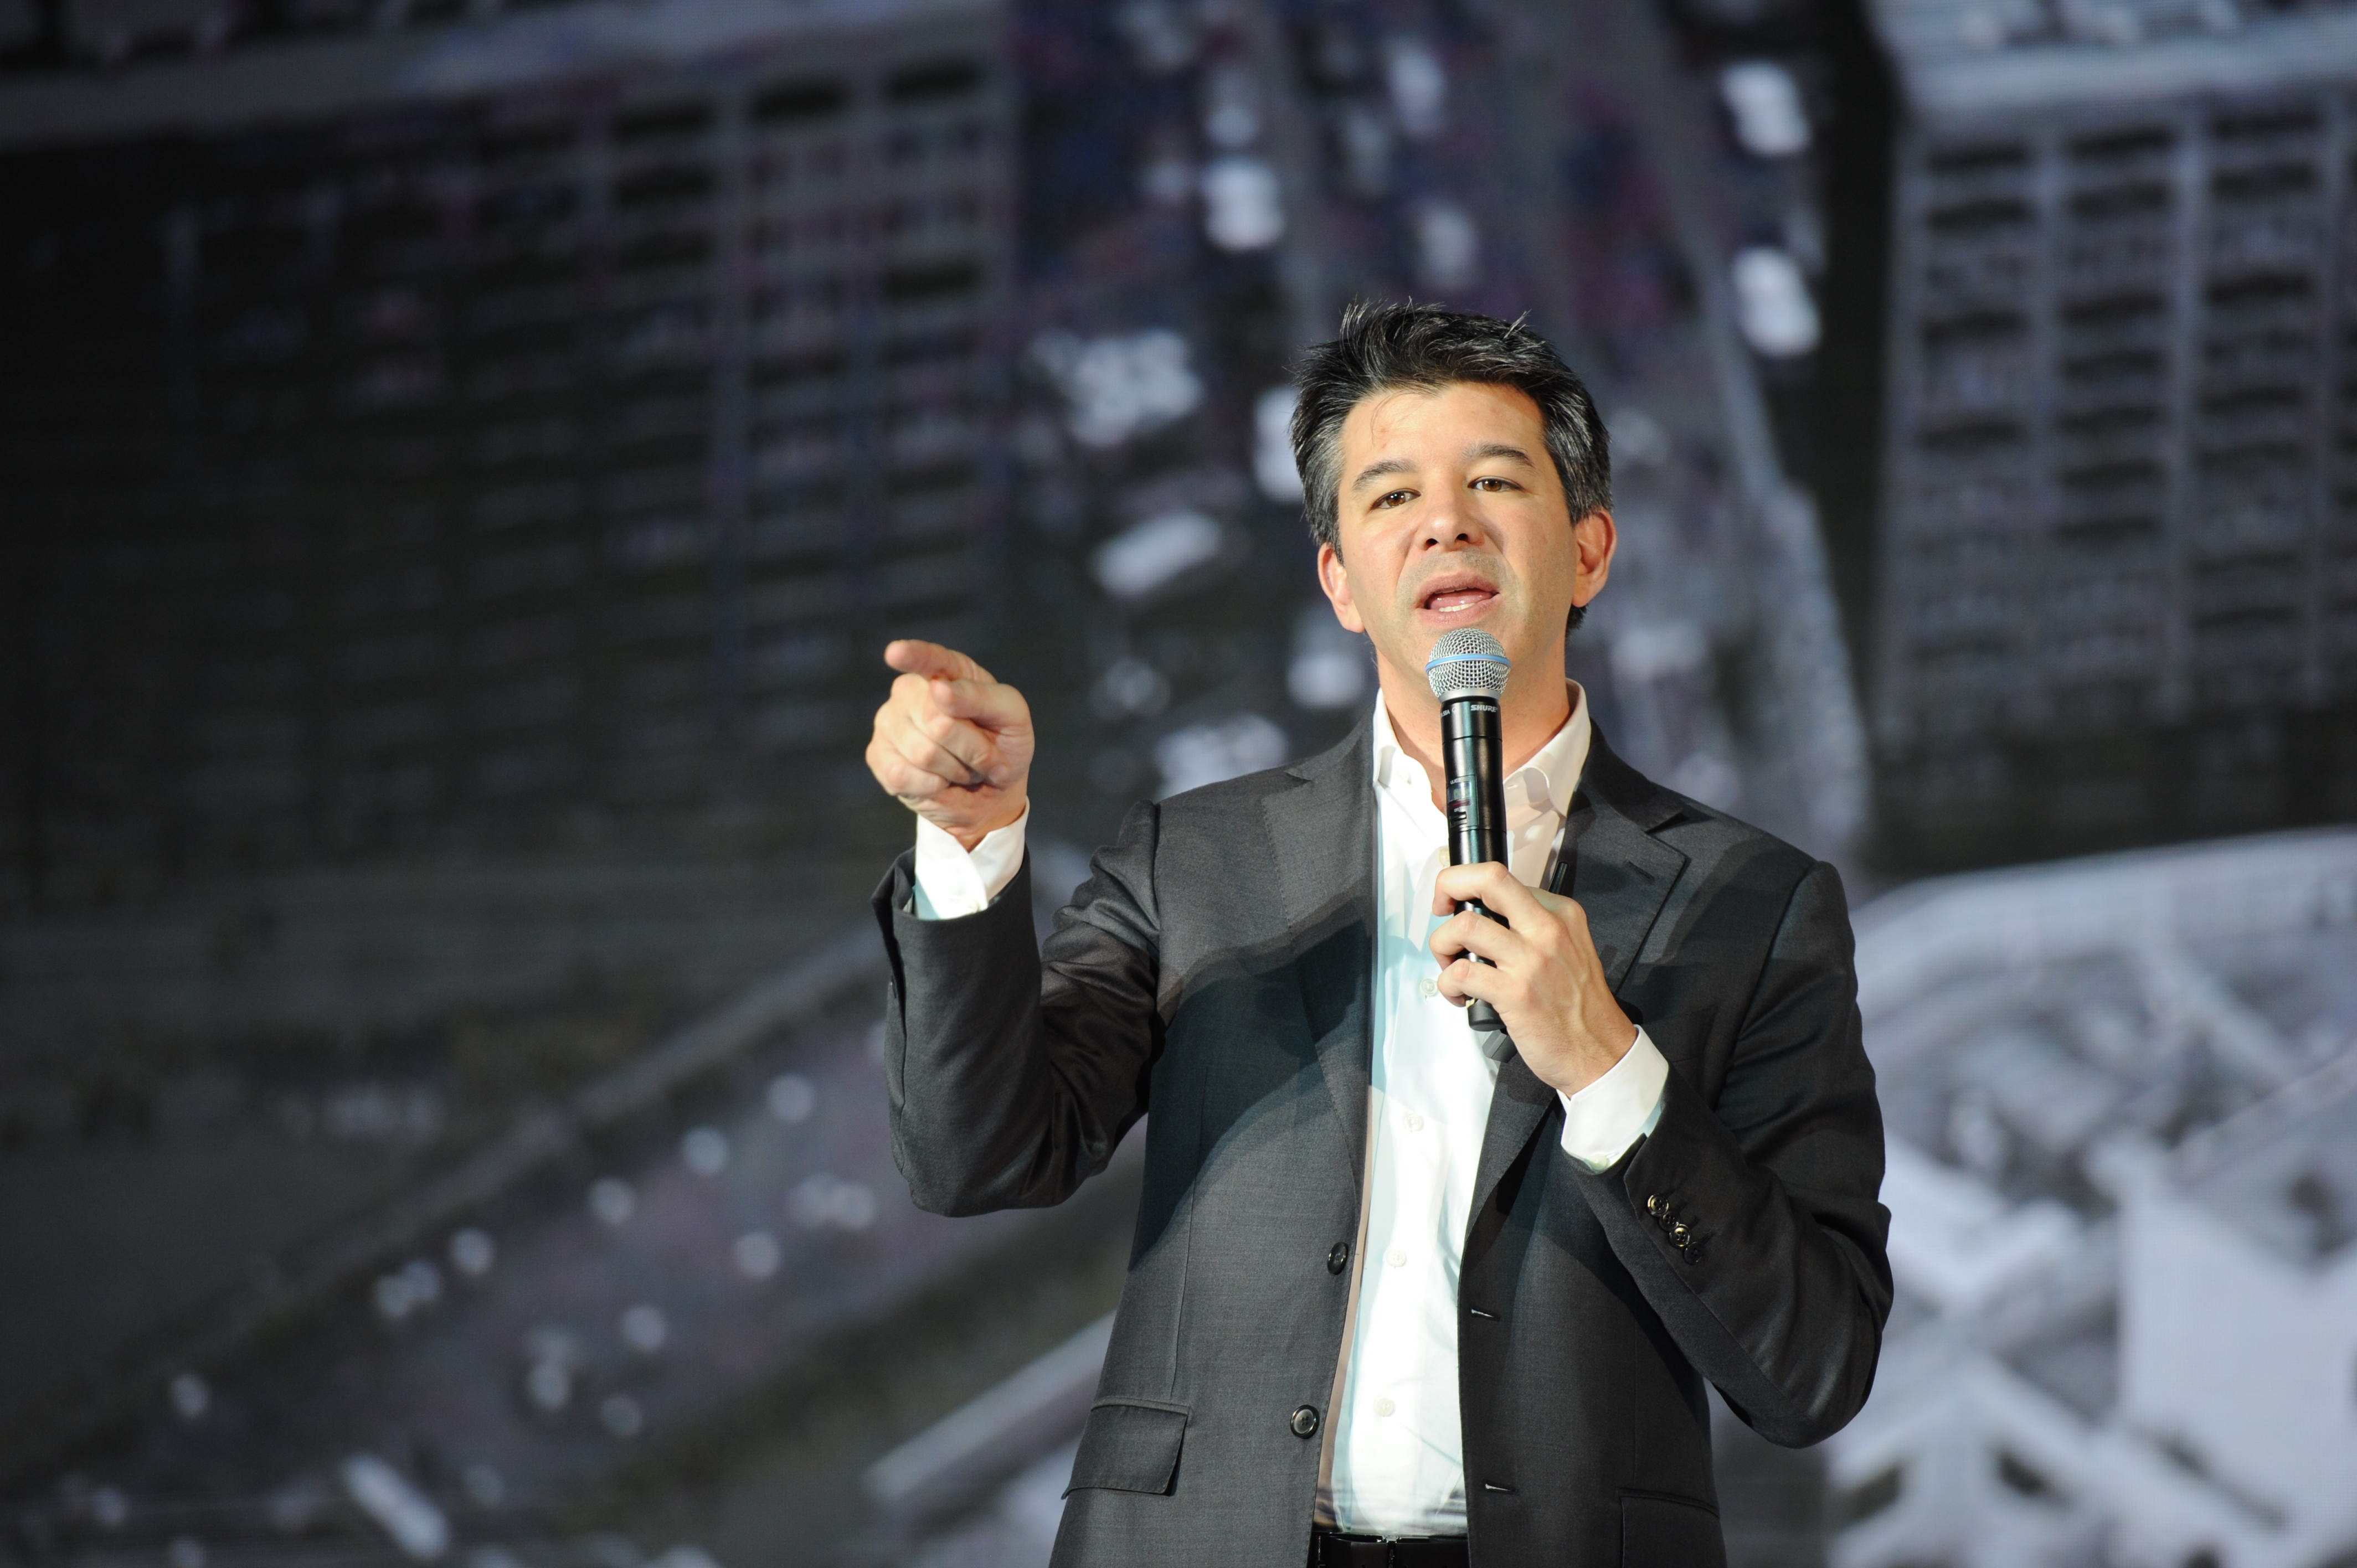 Former Uber CEO Travis Kalanick onstage holding a microphone and pointing at the audience